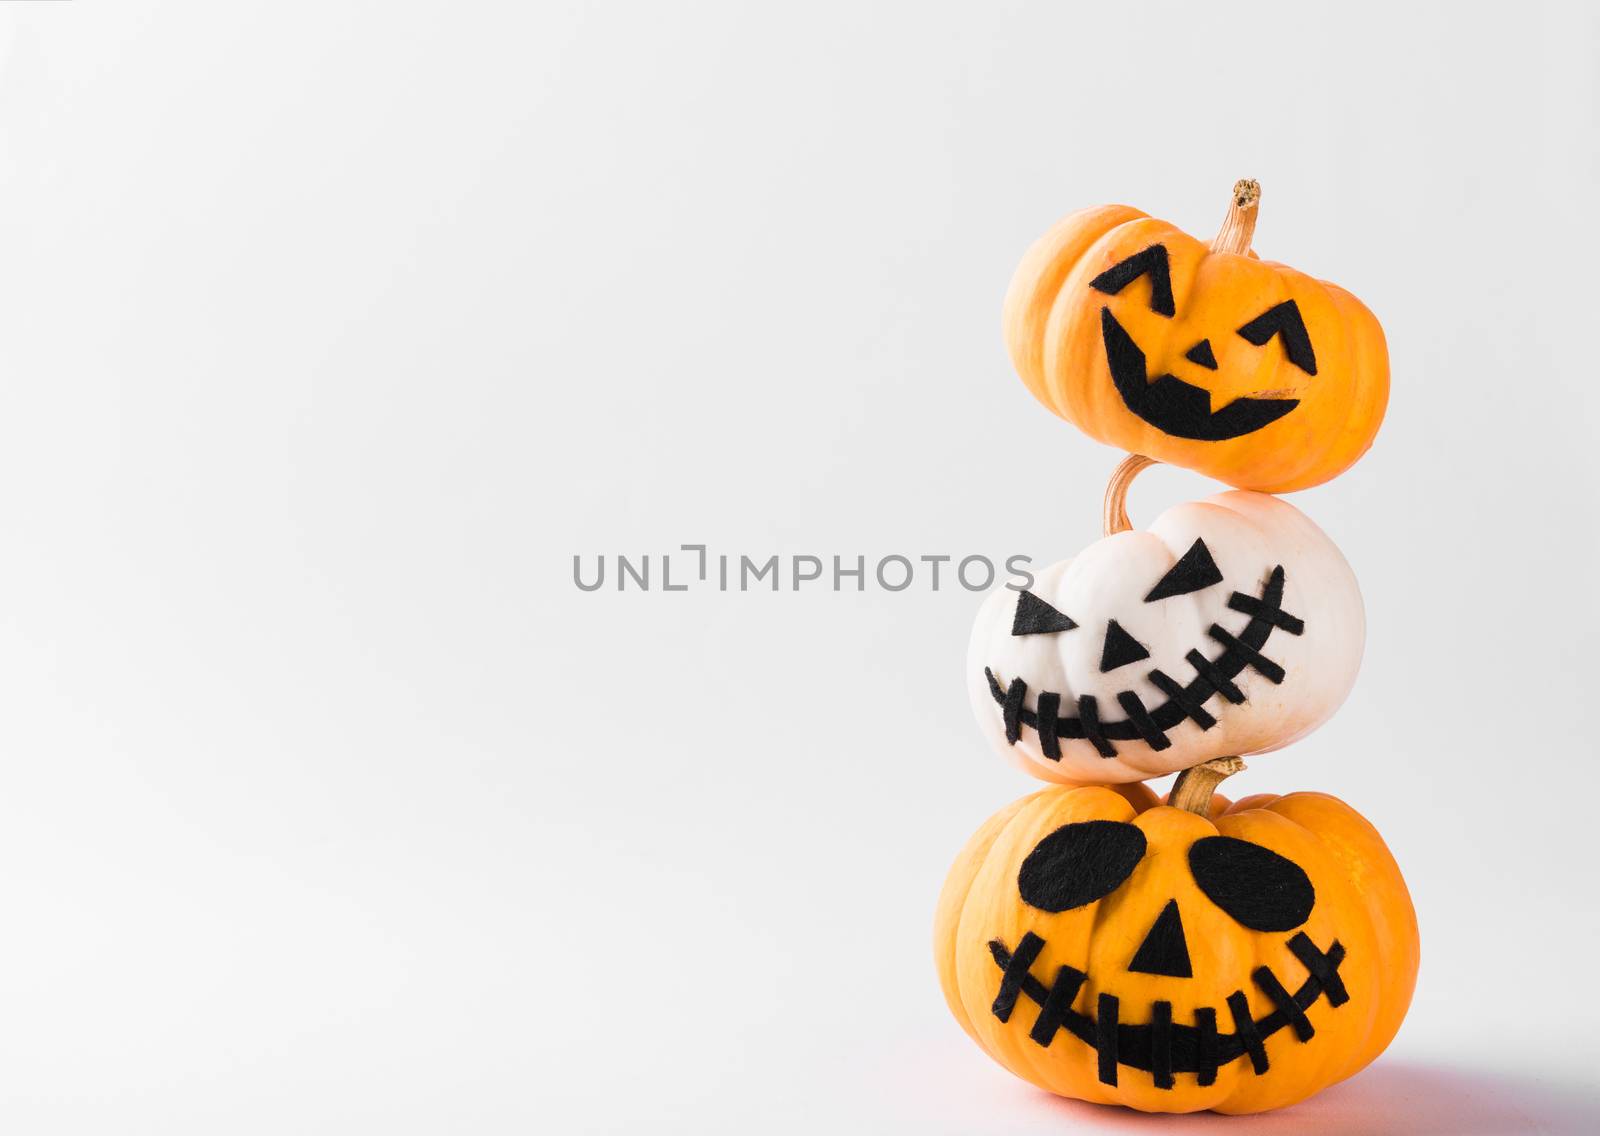 Funny Halloween day party concept ghost pumpkin head jack lantern scary smile and stack together, studio shot isolated on white background, Holiday decoration